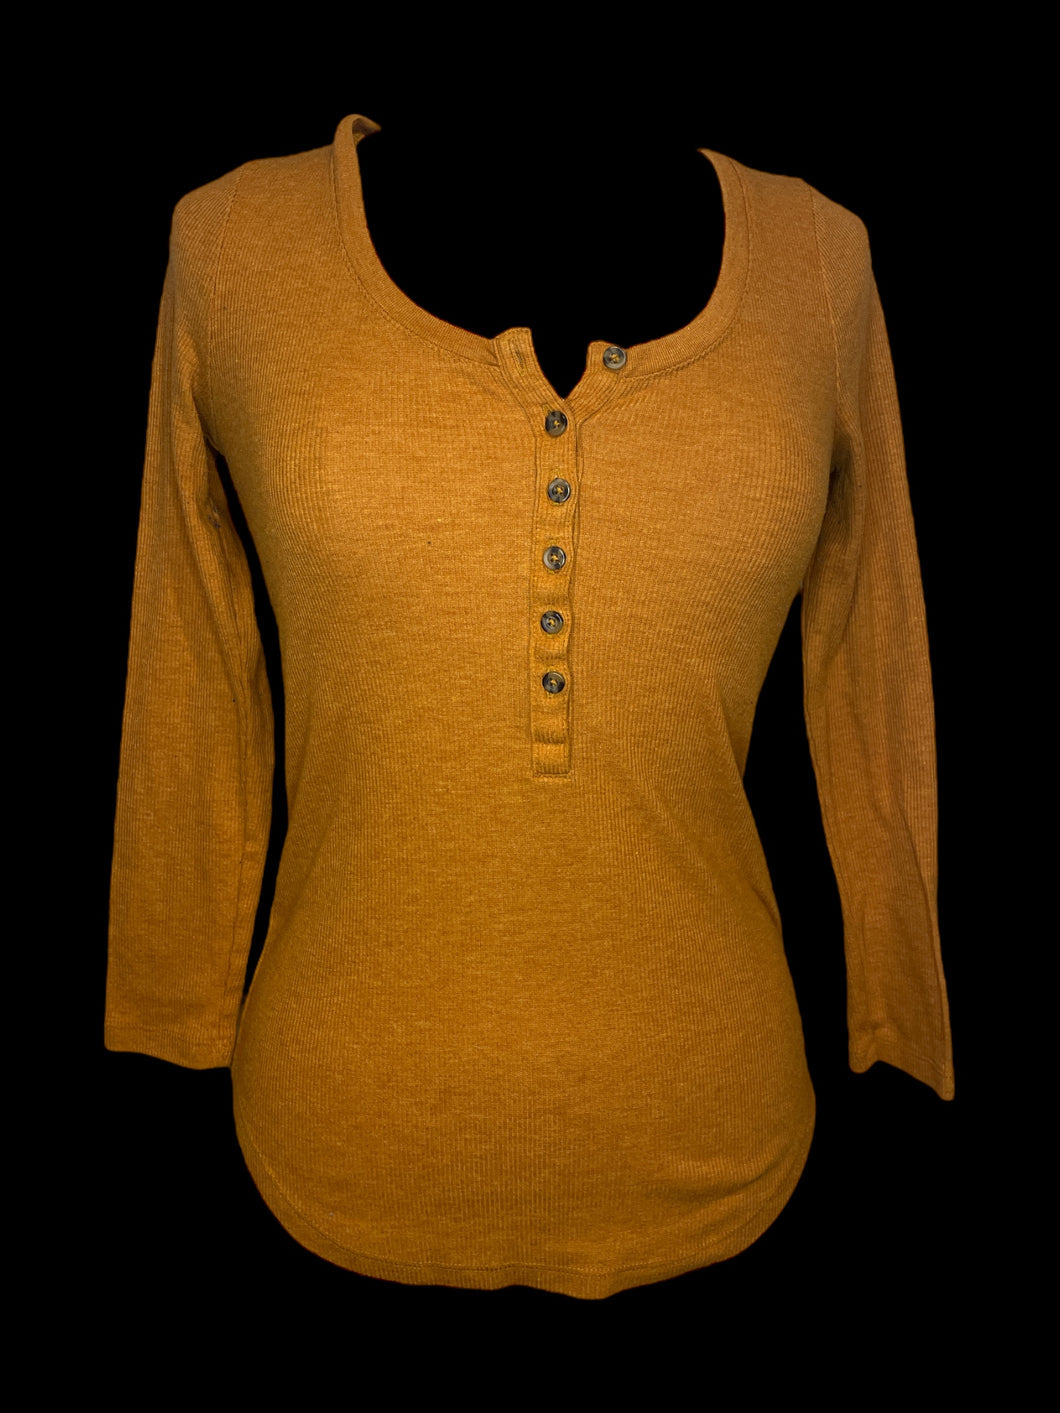 S Mustard yellow scoop neck rib knit 3/4 button down long sleeve top